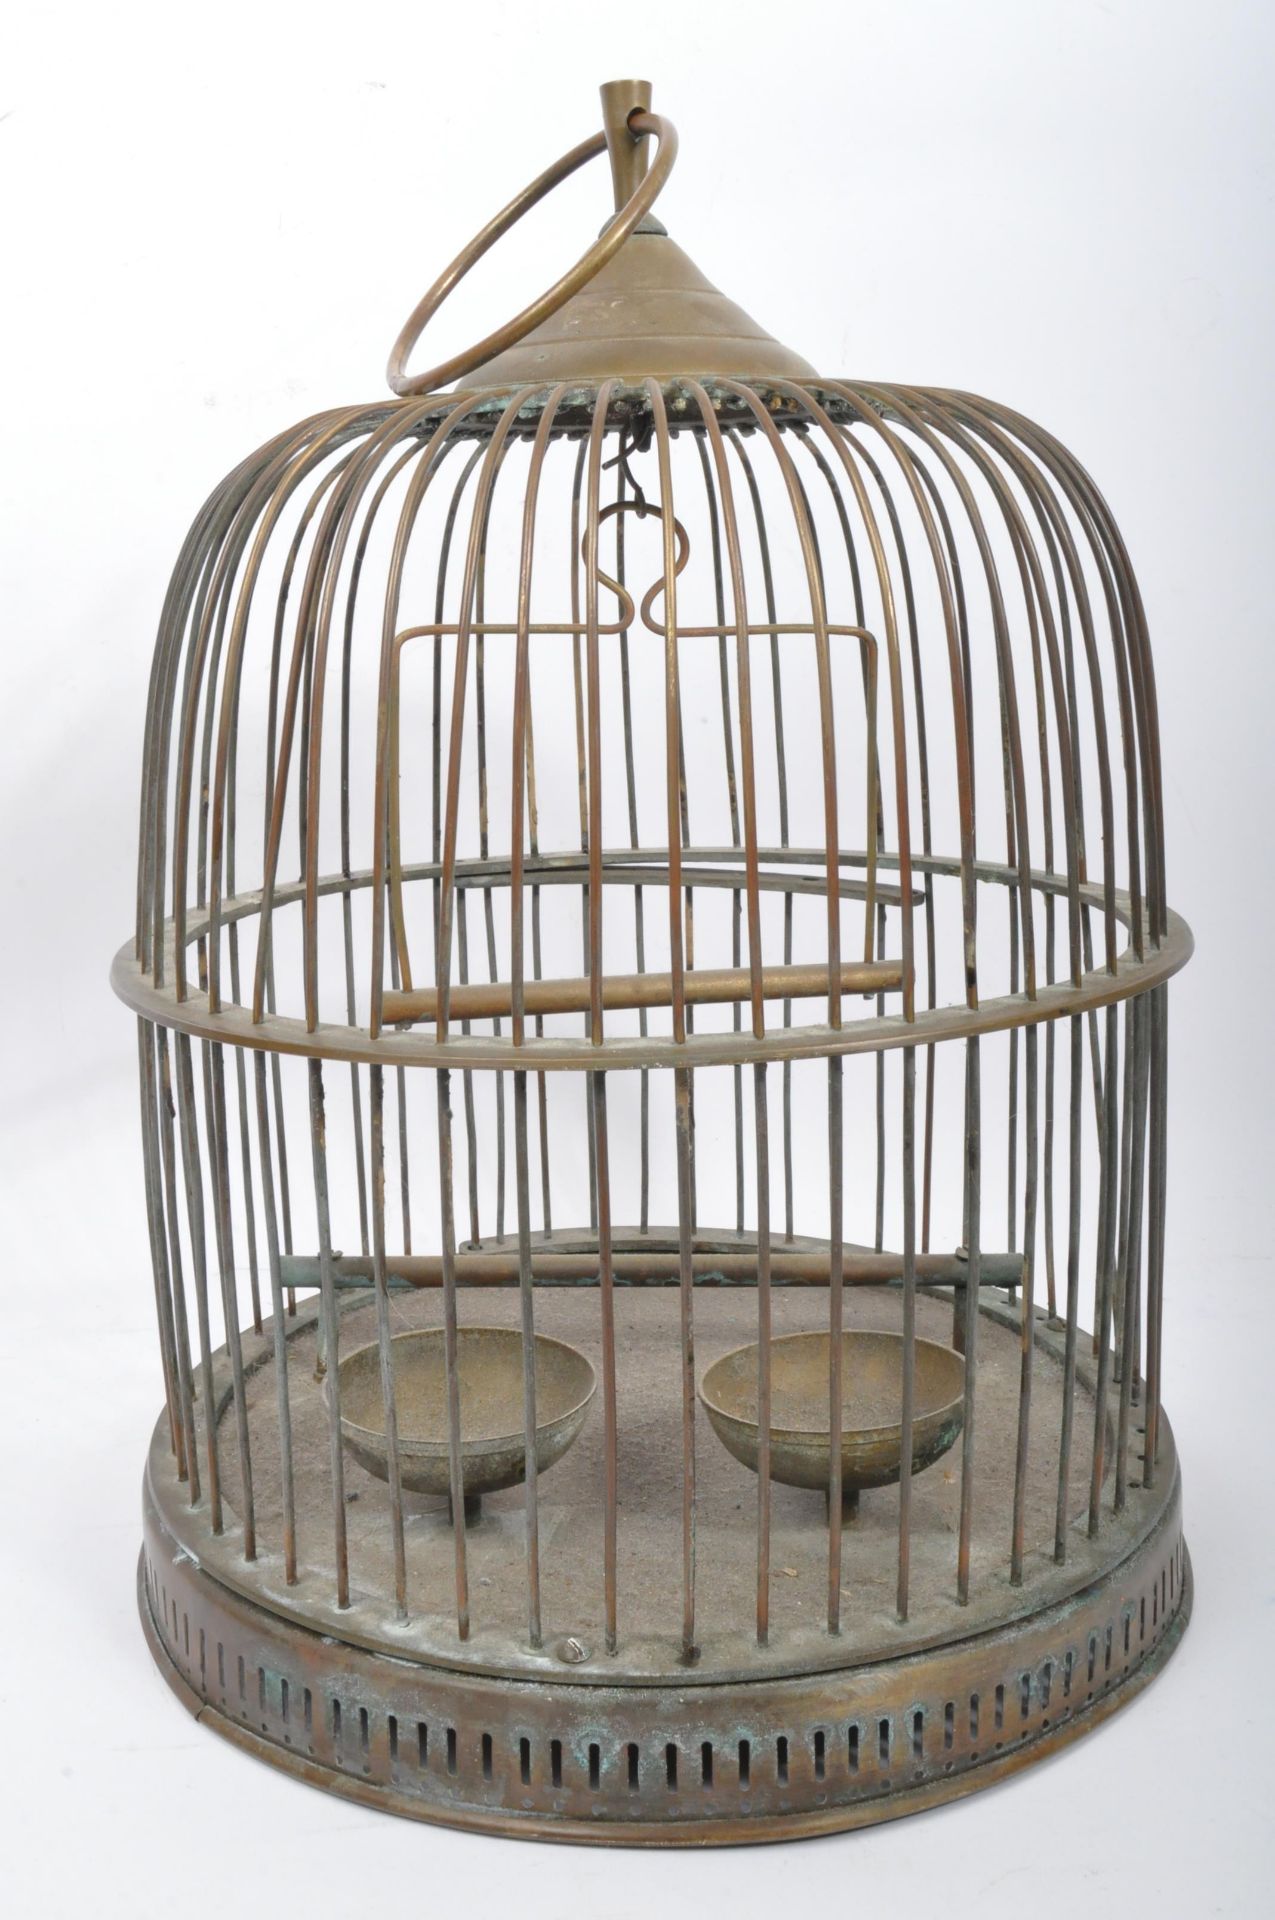 EARLY 20TH CENTURY BRASS DOME SHAPED BIRDCAGE - Image 5 of 5